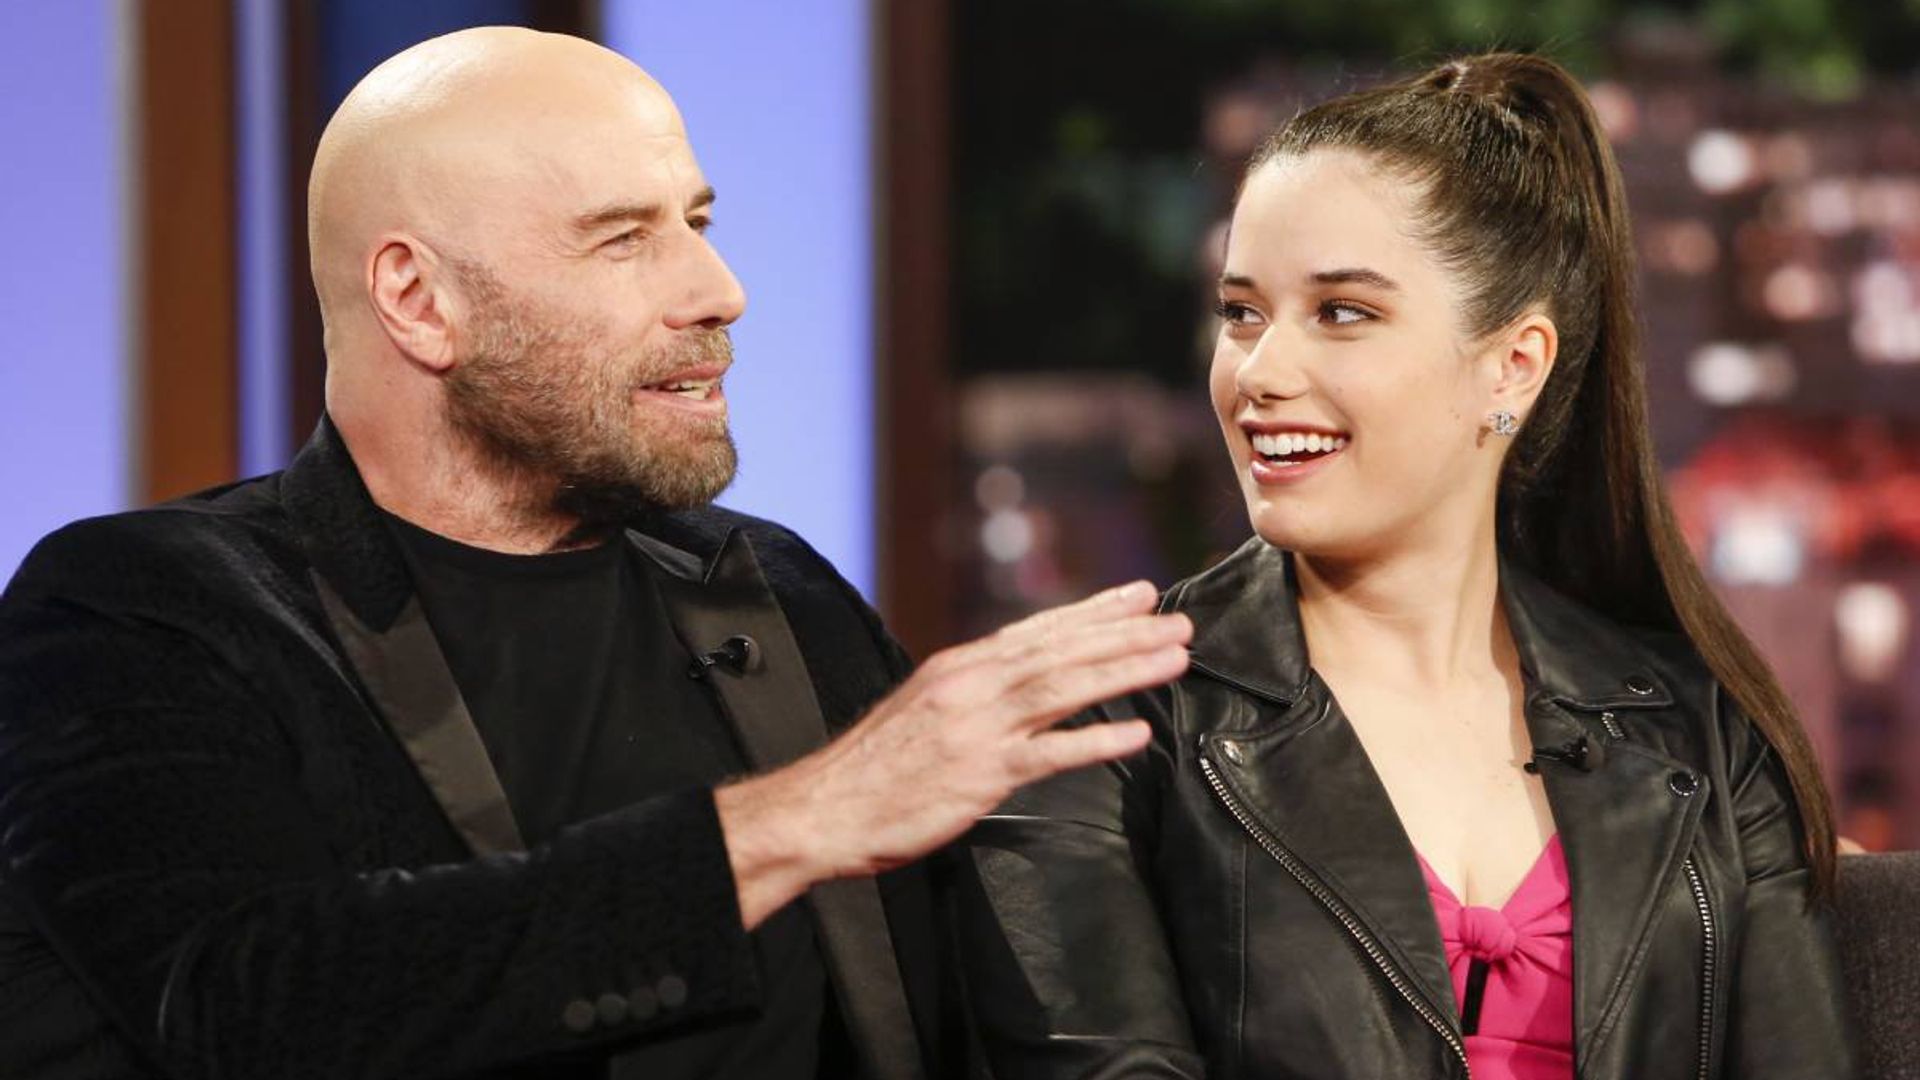 John Travolta had the sweetest thing to say about daughter Ella following latest achievement